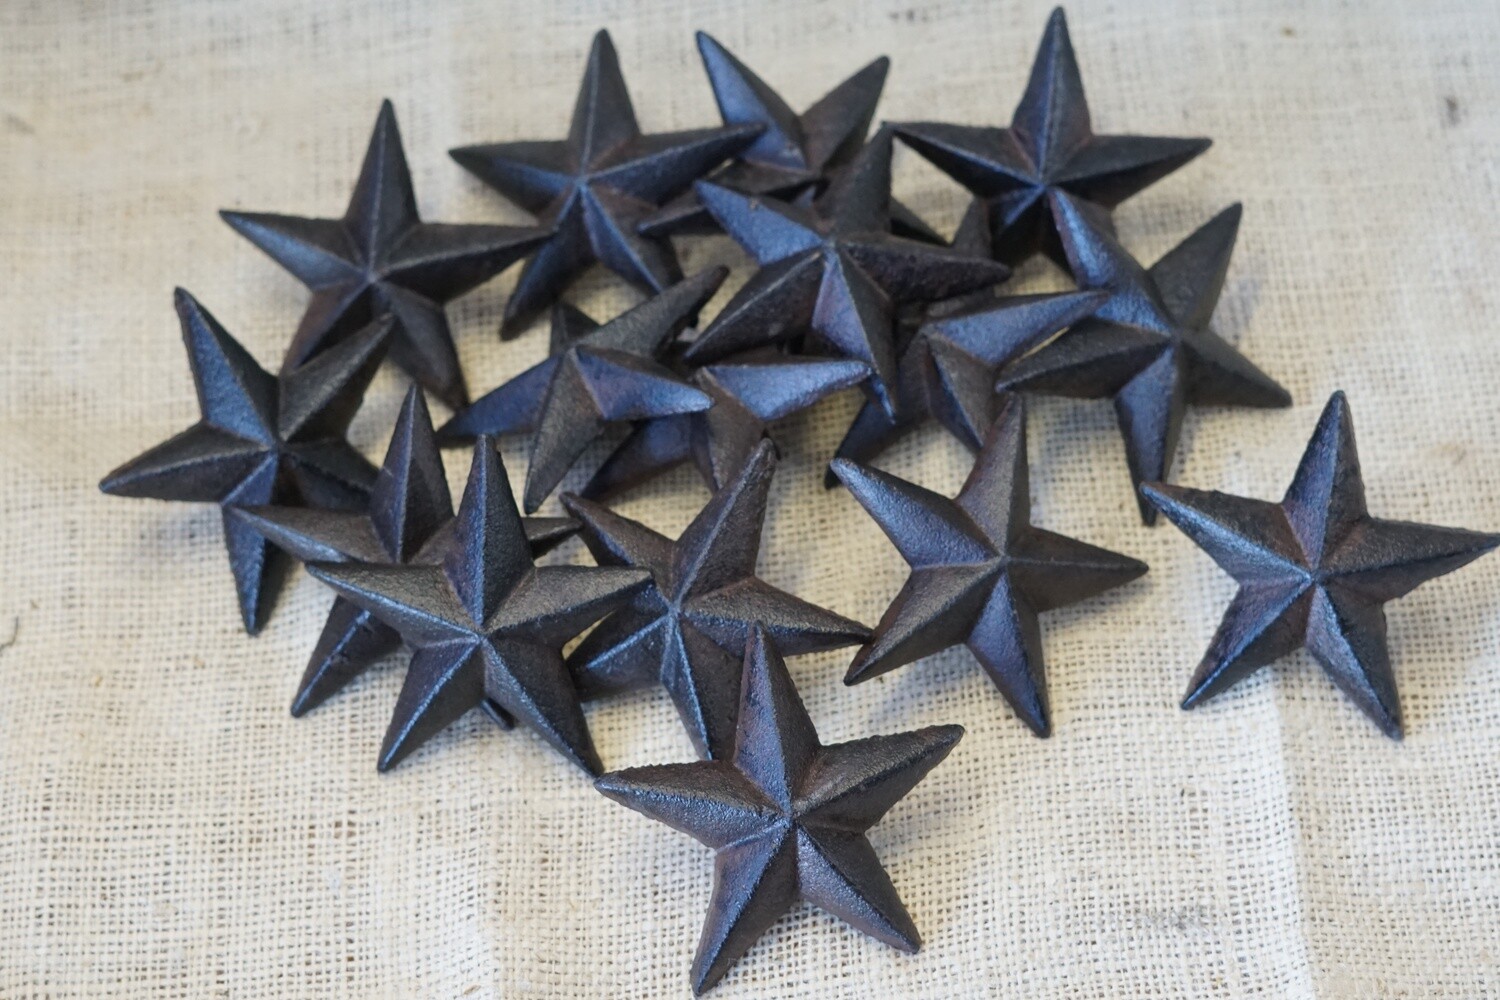 LARGE CAST IRON RUSTIC STAR NAIL, 3 1/2" WIDE